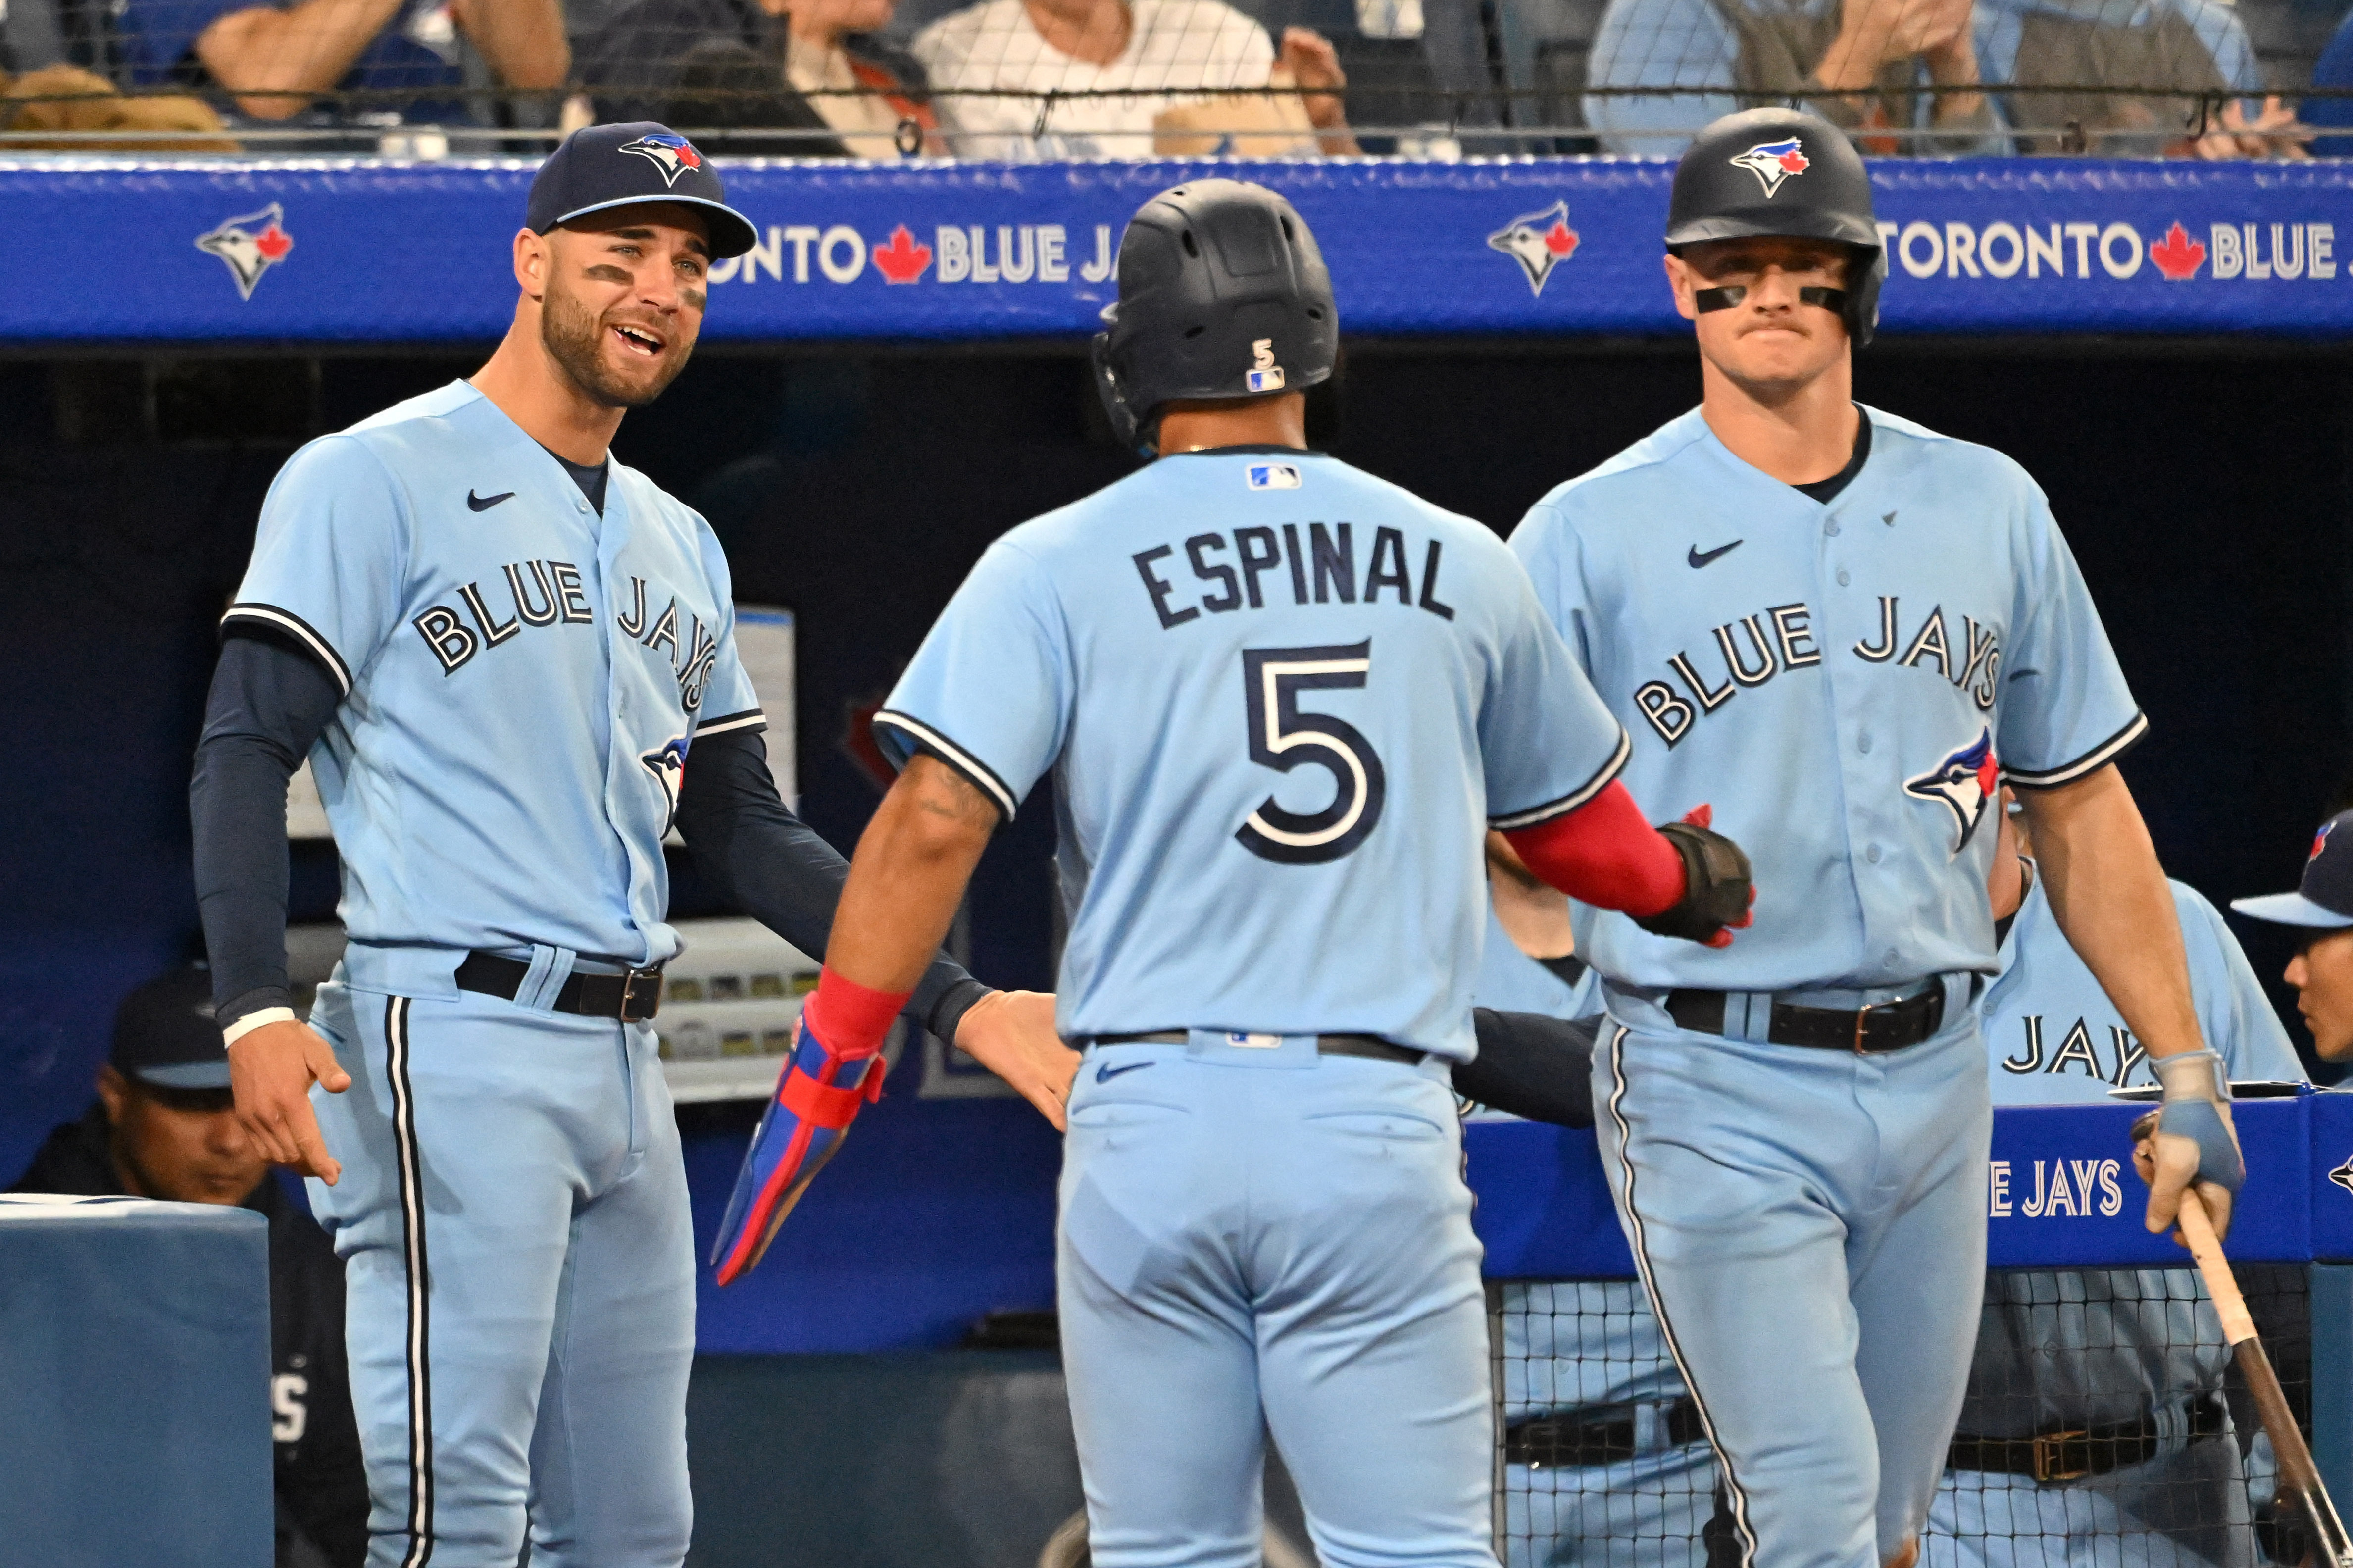 Rays hang 14 on White Sox, who drop eighth straight